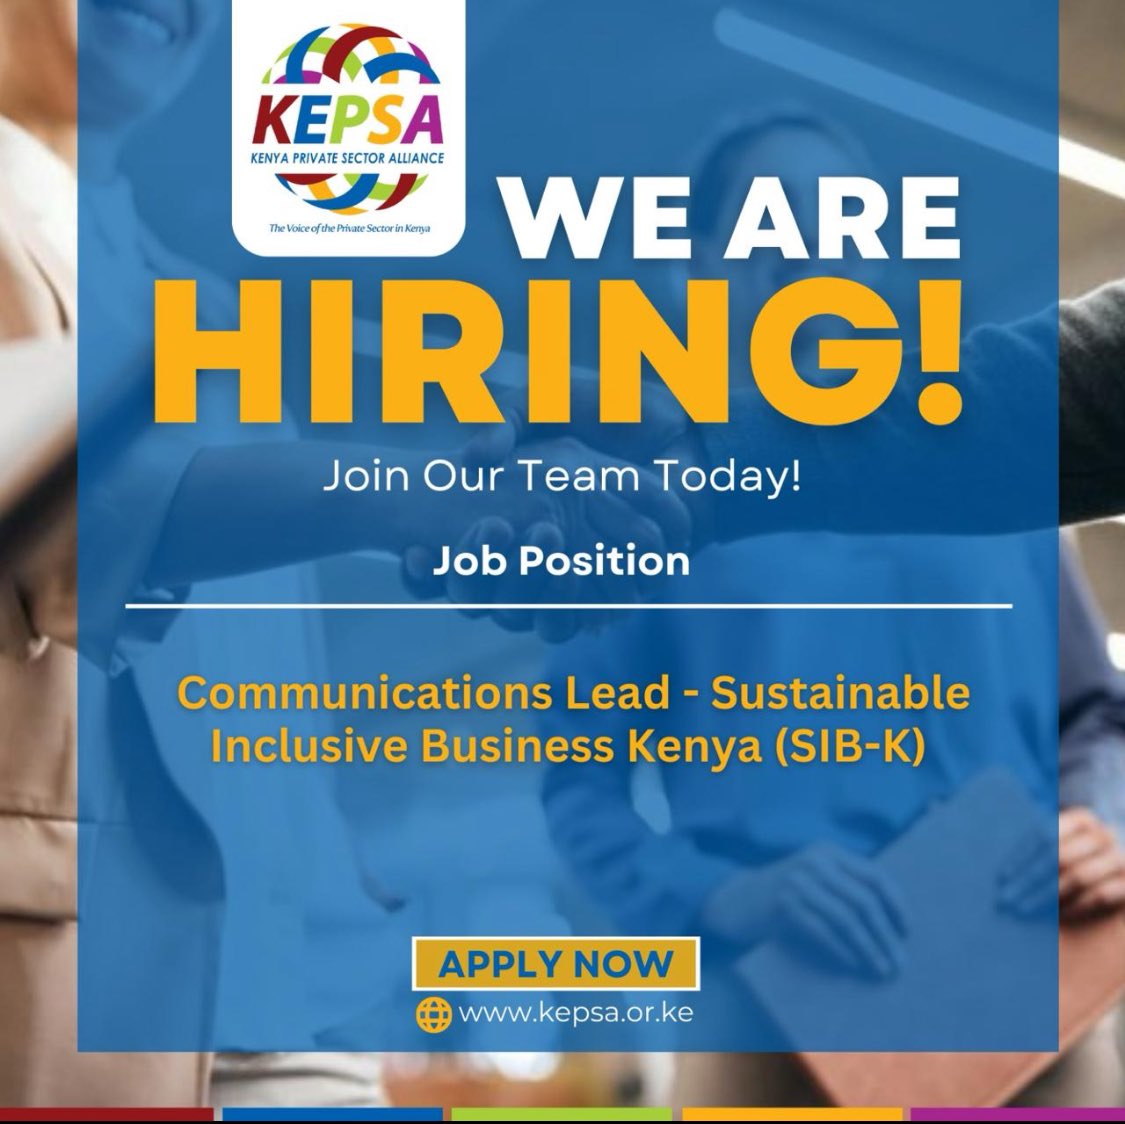 Are you a seasoned communications professional with experience in sustainability and project management? We’re looking for you to join @SustainaBizKe under @KEPSA_KENYA. Click on the link to apply: shorturl.at/yHKY3